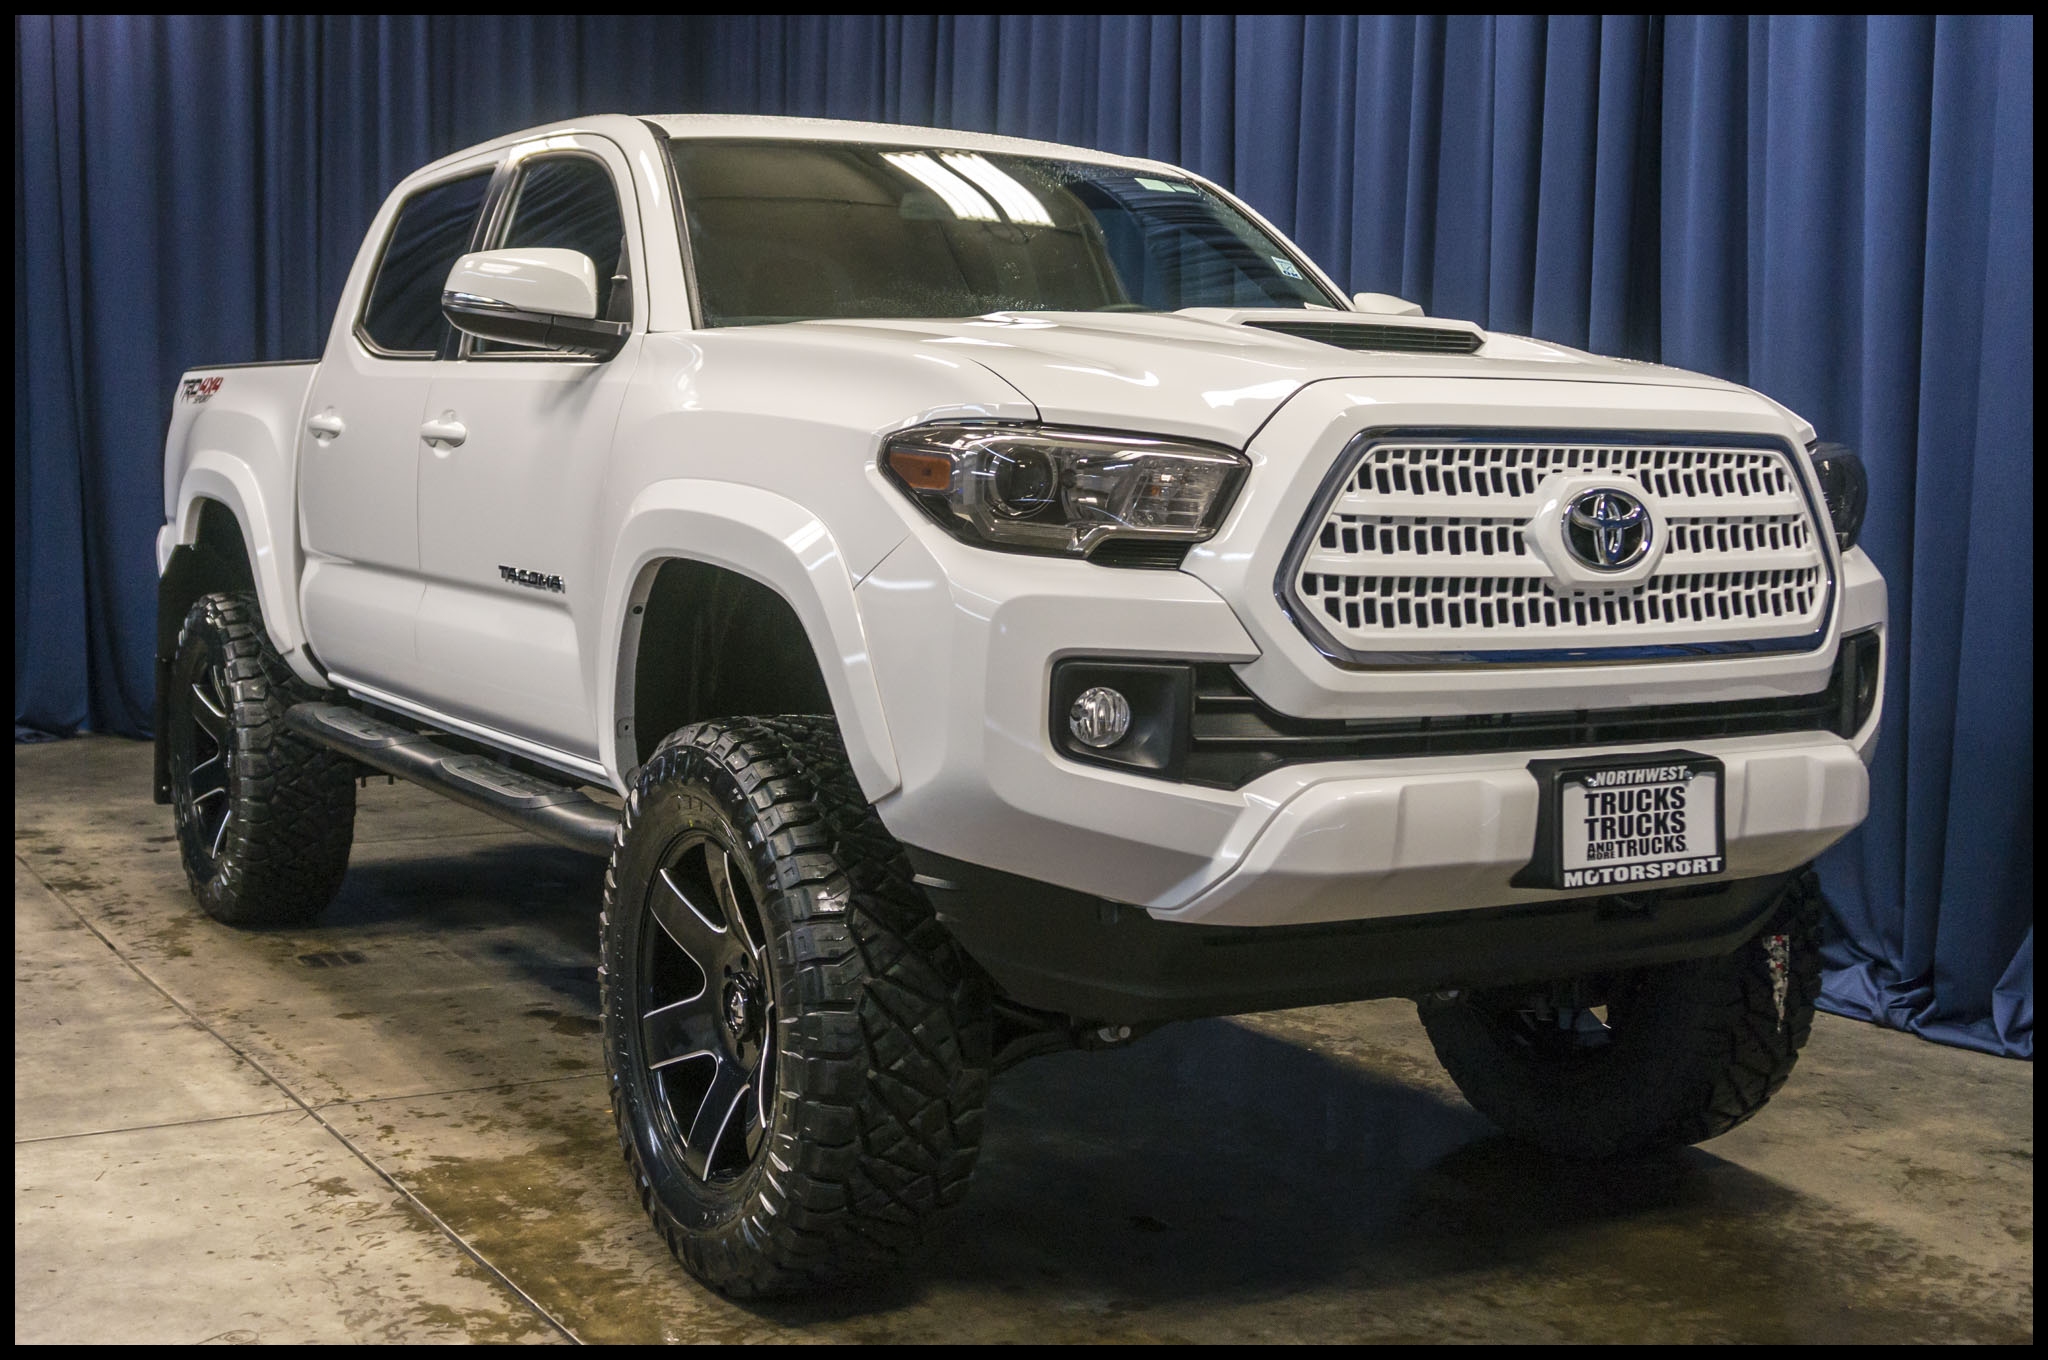 Lifted Toyota Ta as For Sale Used Lifted 2017 Toyota Ta a TRD Sport 4x4 Truck